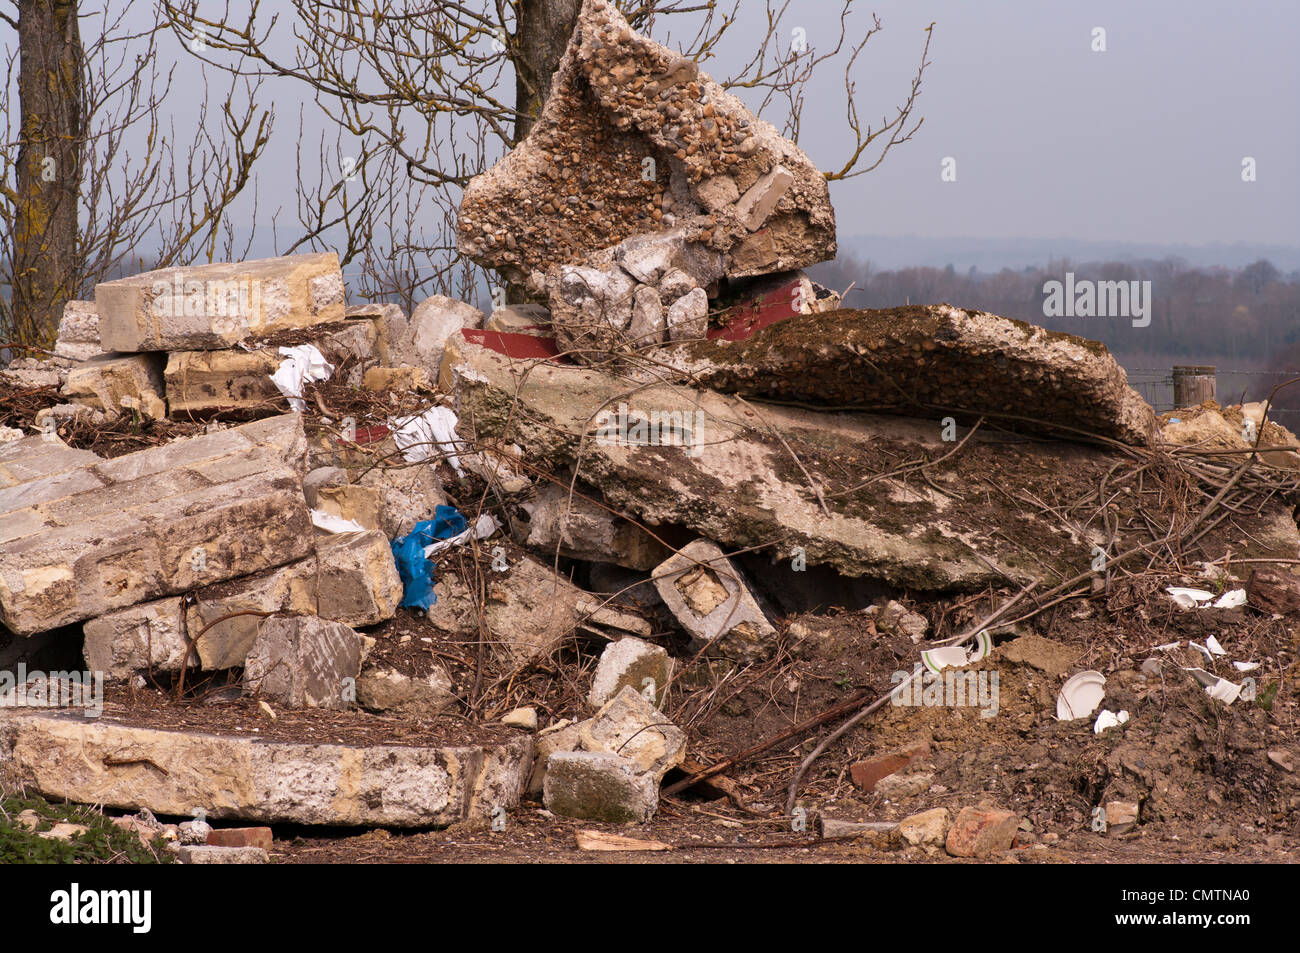 Pile Of Builders Rubble Roadside Fly Tipping Flytipping In The UK Countryside Stock Photo